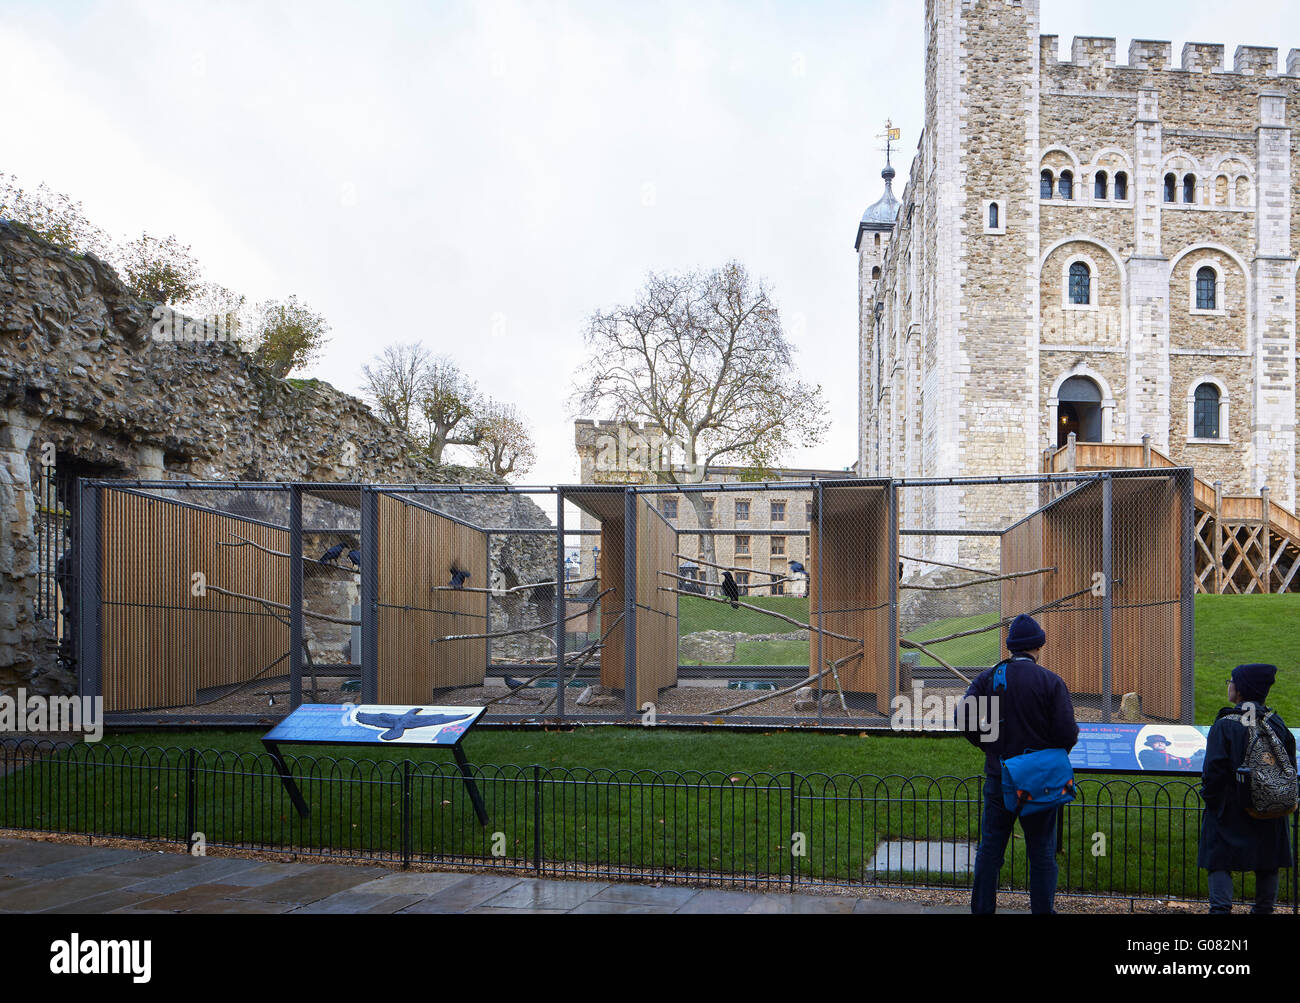 Low level view from tower wall with Tower of London in background. Ravens Night Enclosures at Tower of London, London, United Kingdom. Architect: llowarch and llowarch architects, 2015. Stock Photo